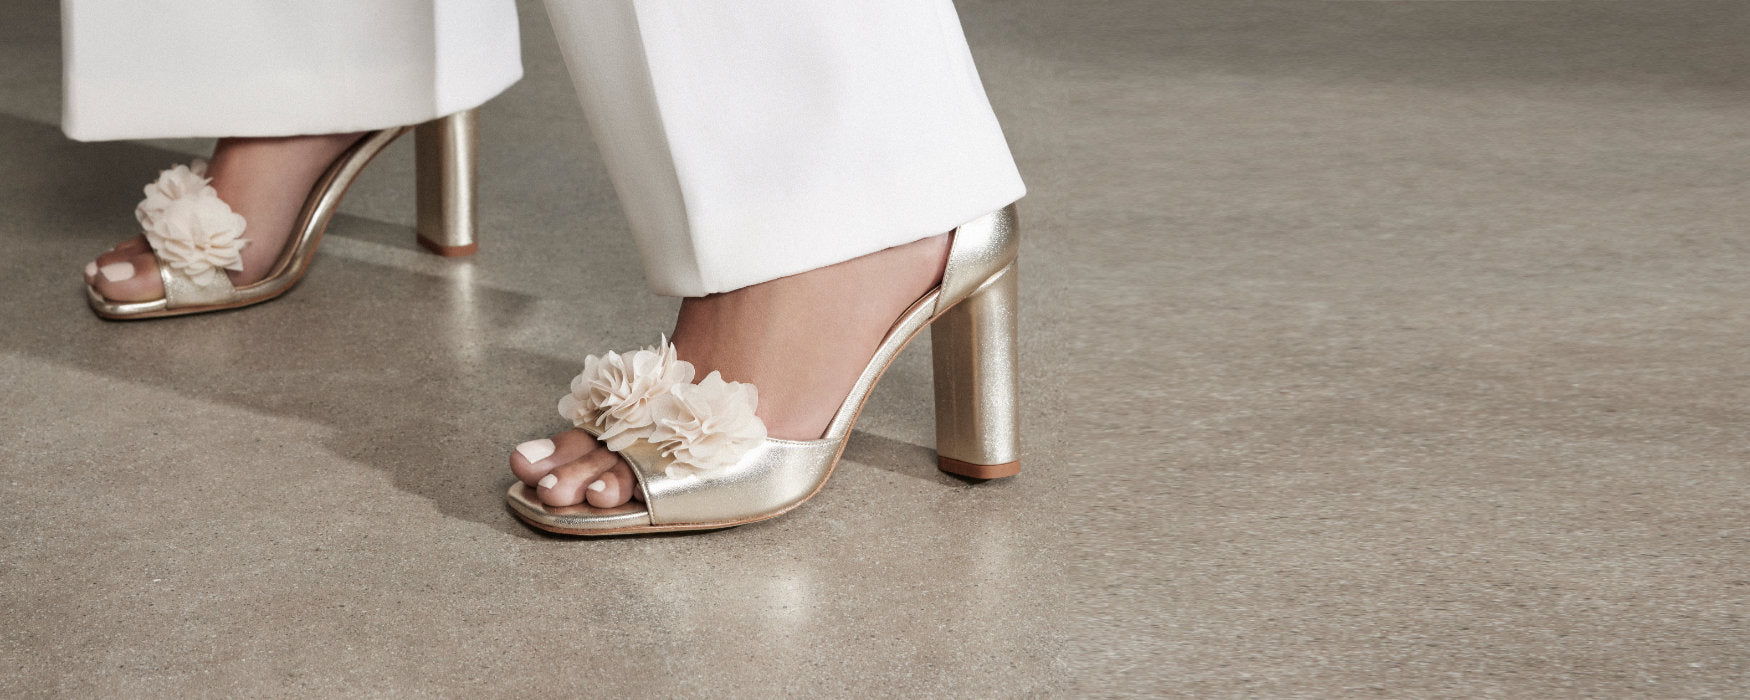 TWO-TONE WEDDING SHOES